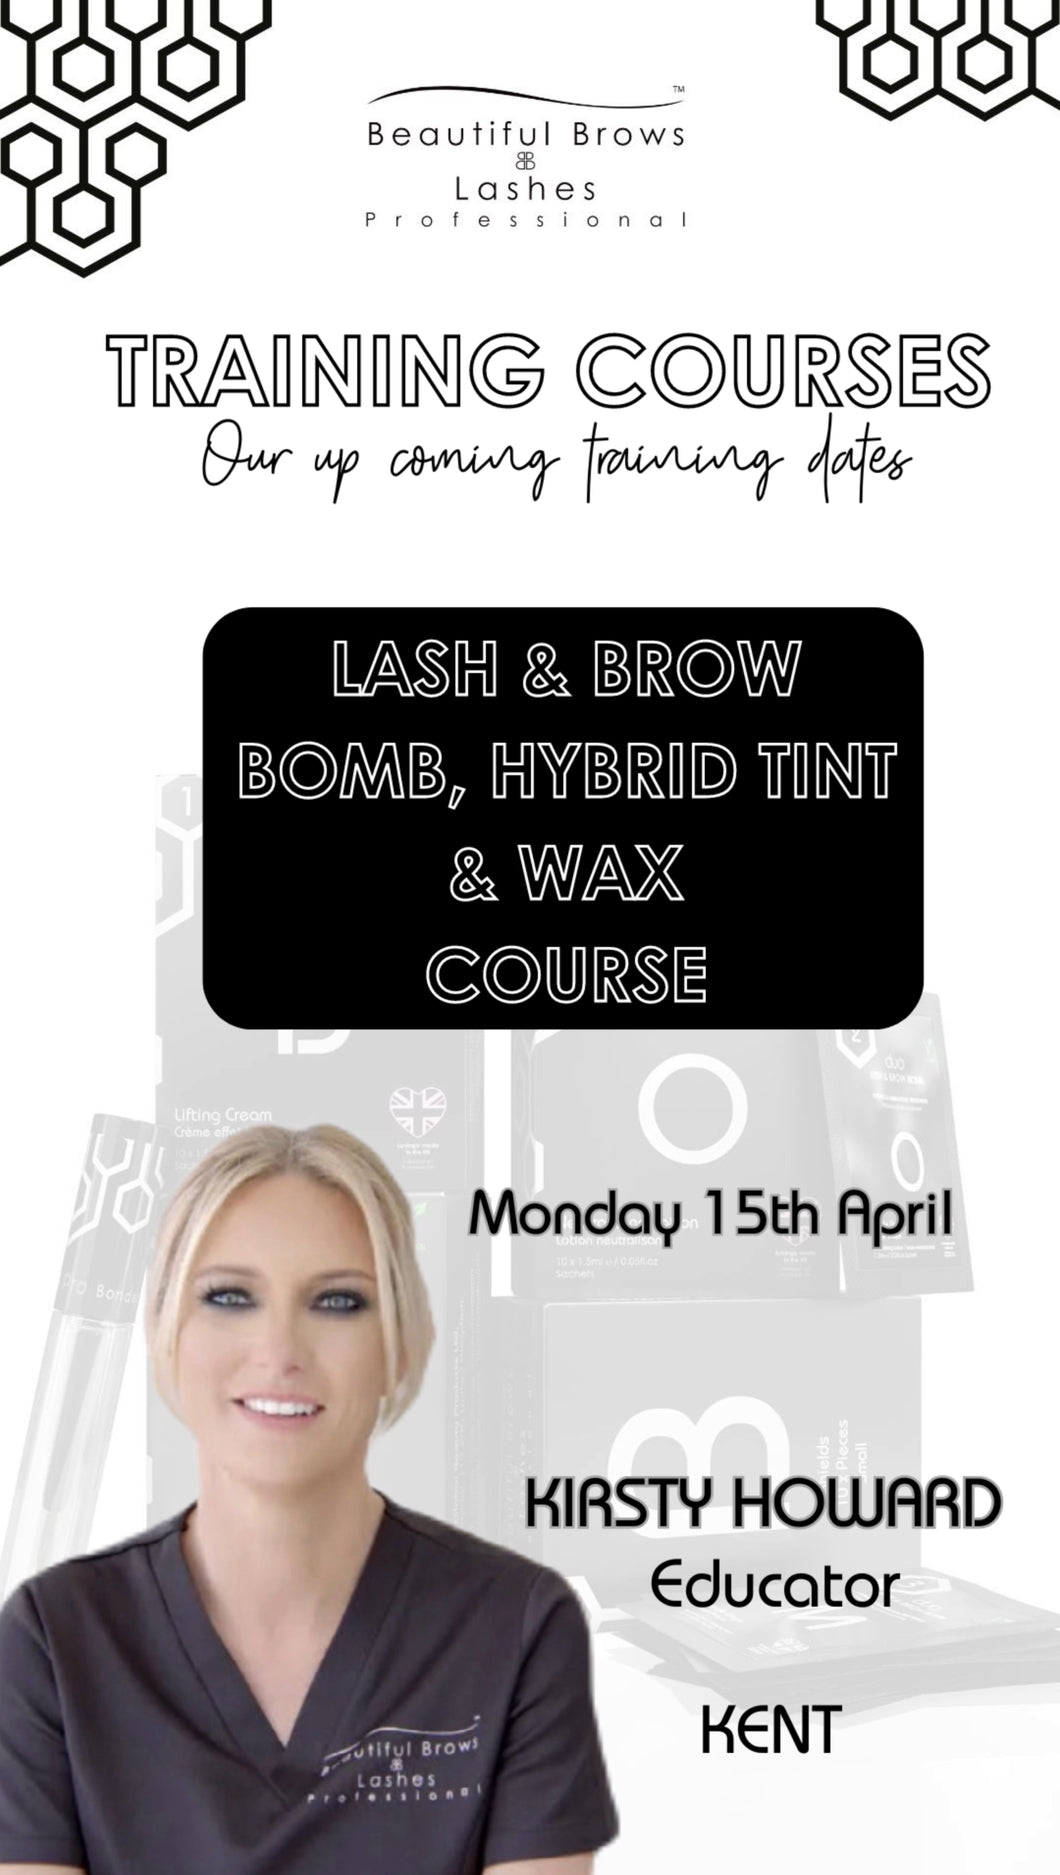 Accredited Official Lash & Brow Bomb, Hybrid Tint & Wax Course with Kirsty